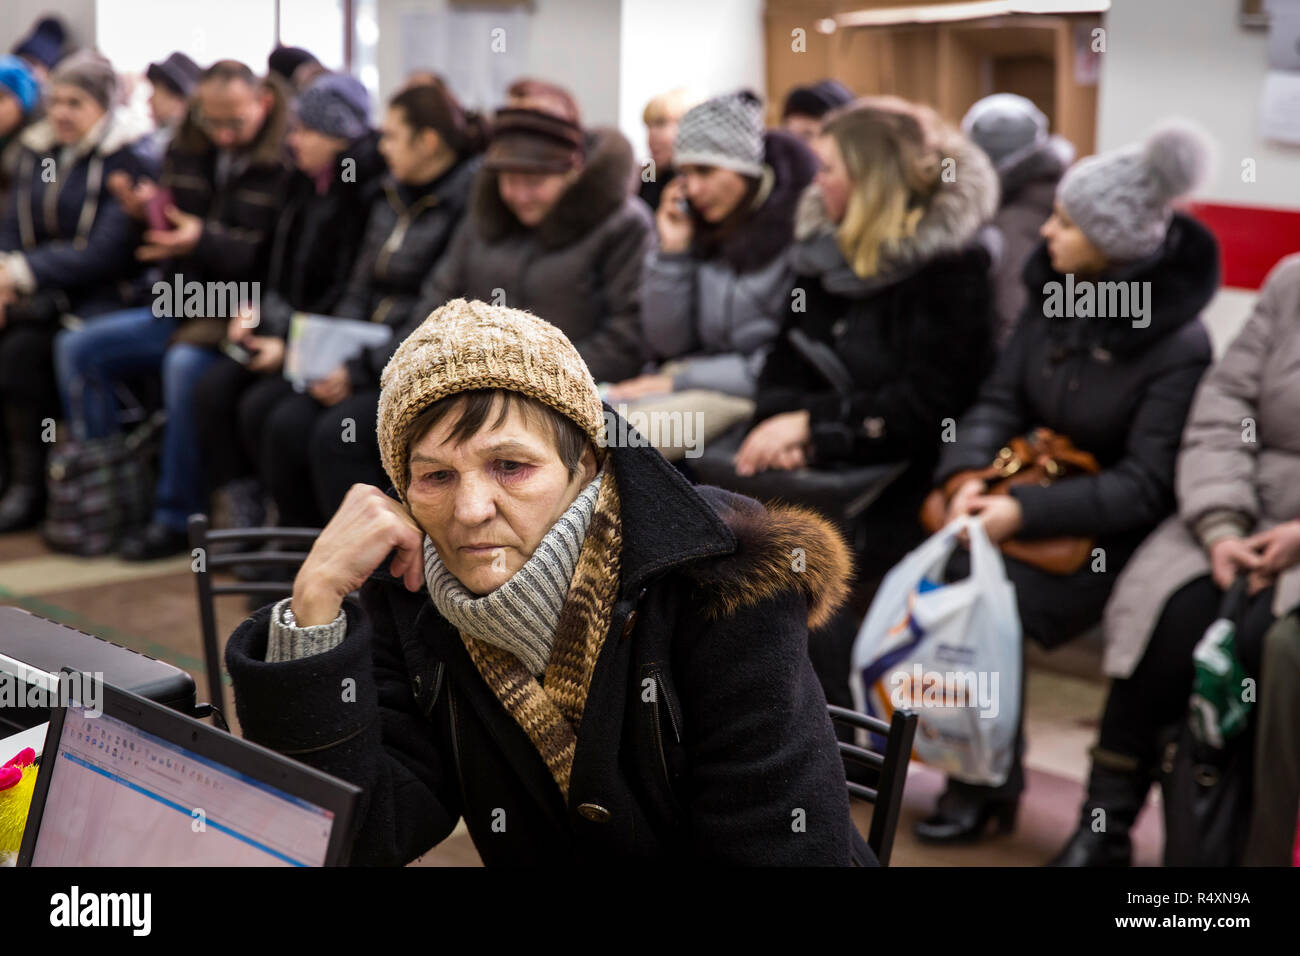 The refugees are registered in the port of call in Kharkiv. Volenteers organize the care of incoming refugees from the separatist area in Eastern Ukraine and provide for the accommodation and care of the refugees. Stock Photo